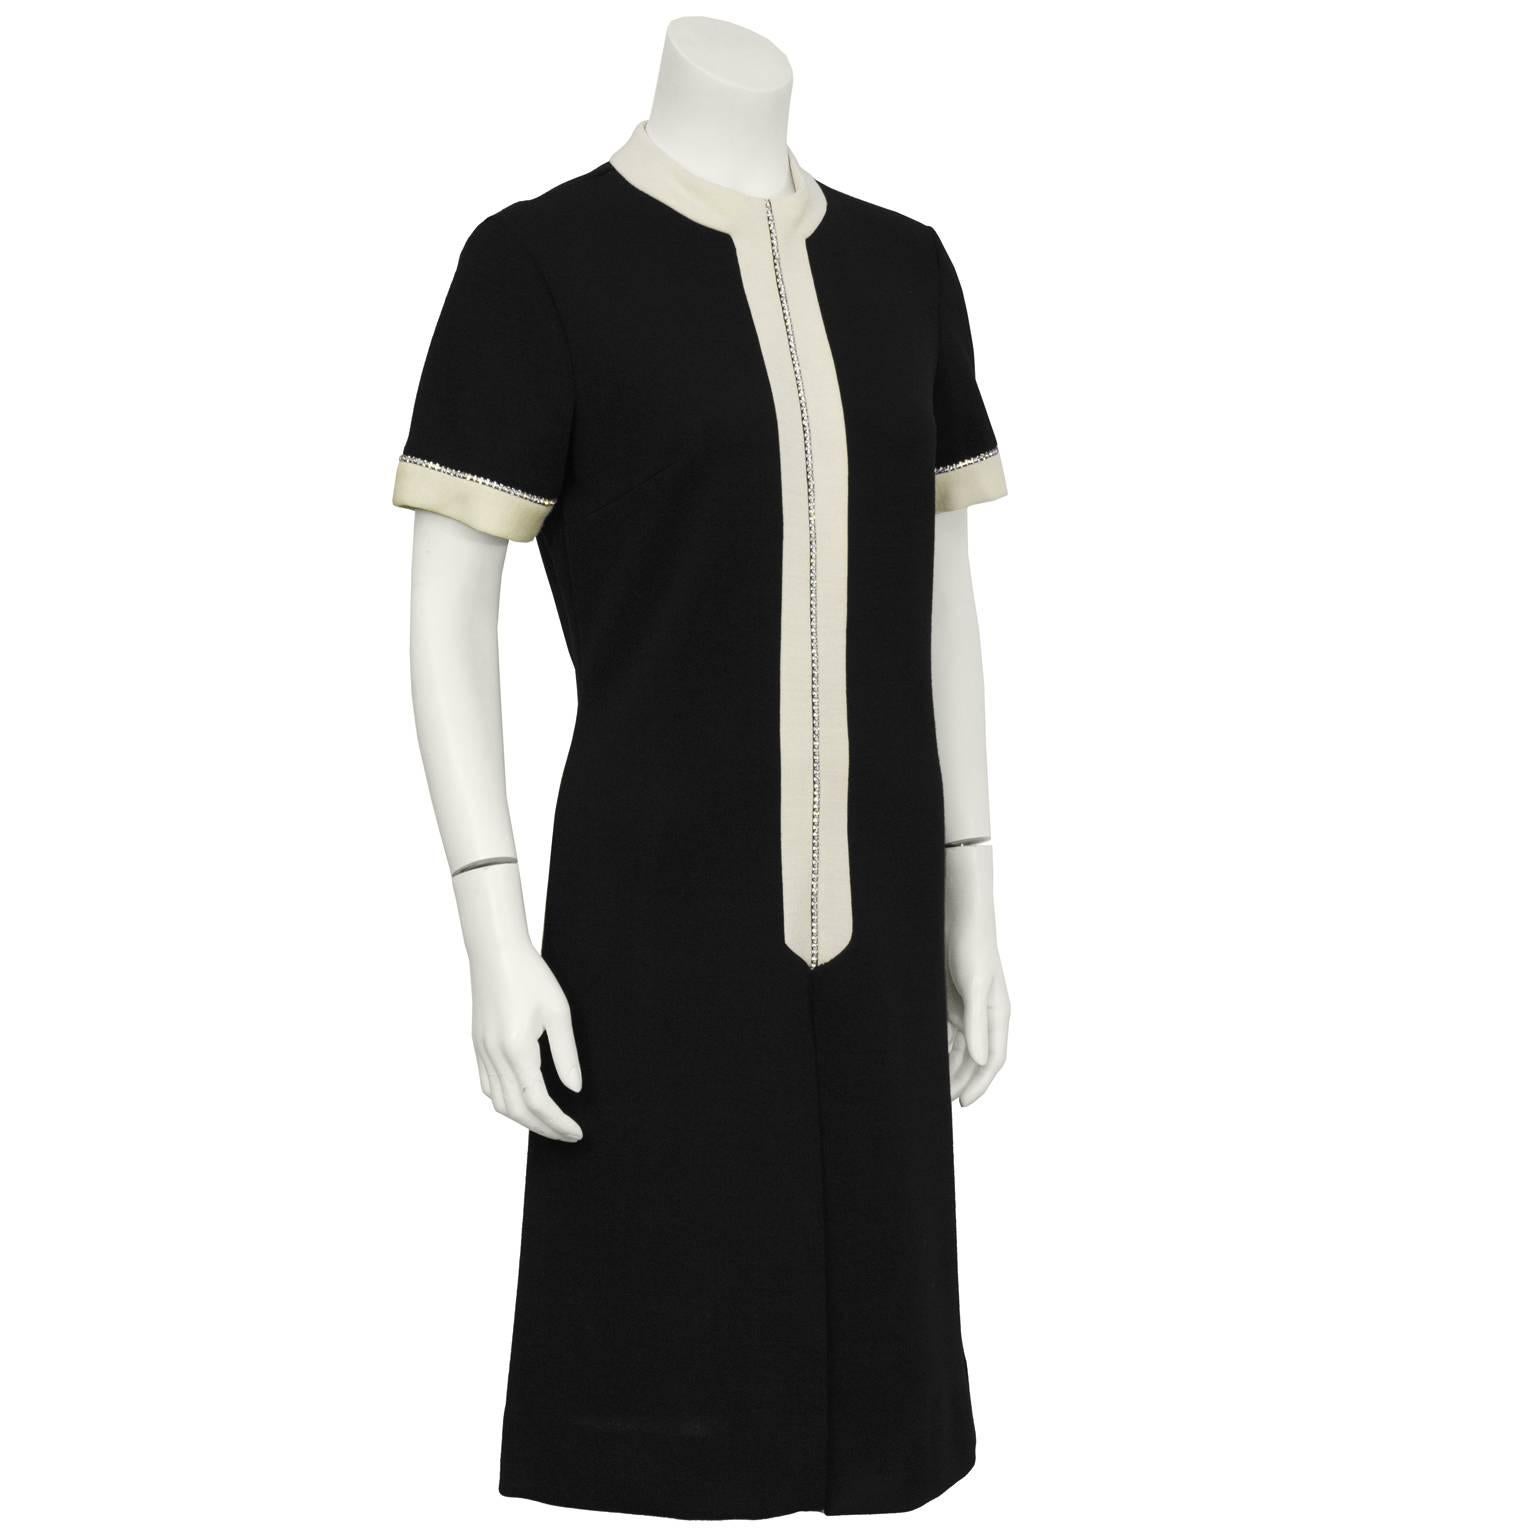 1960's knit dress with rhinestone detail. The dress has a high collar with cream knit placket embellished with a rhinestone detail down the front as well as on the cuffs. Inverted pleat at the front and zips up the back with two hooks at the neck.